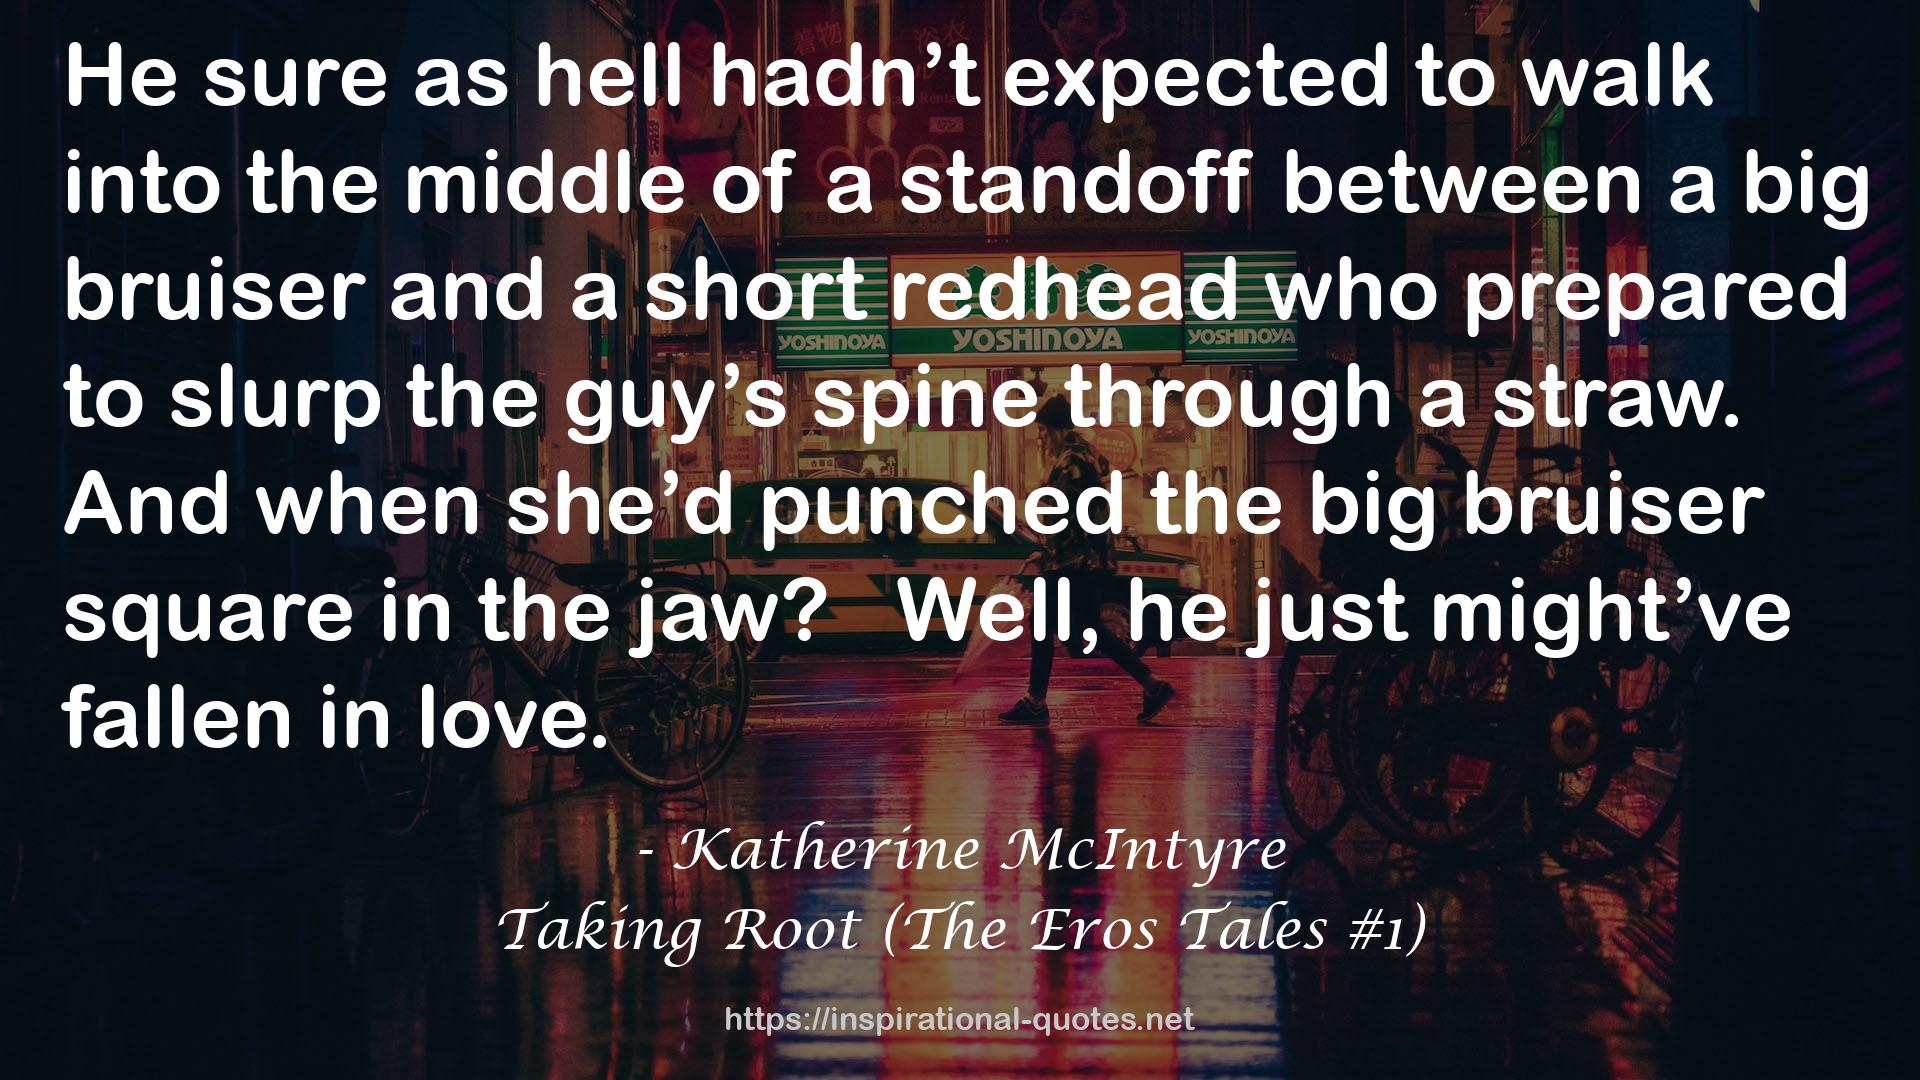 Taking Root (The Eros Tales #1) QUOTES